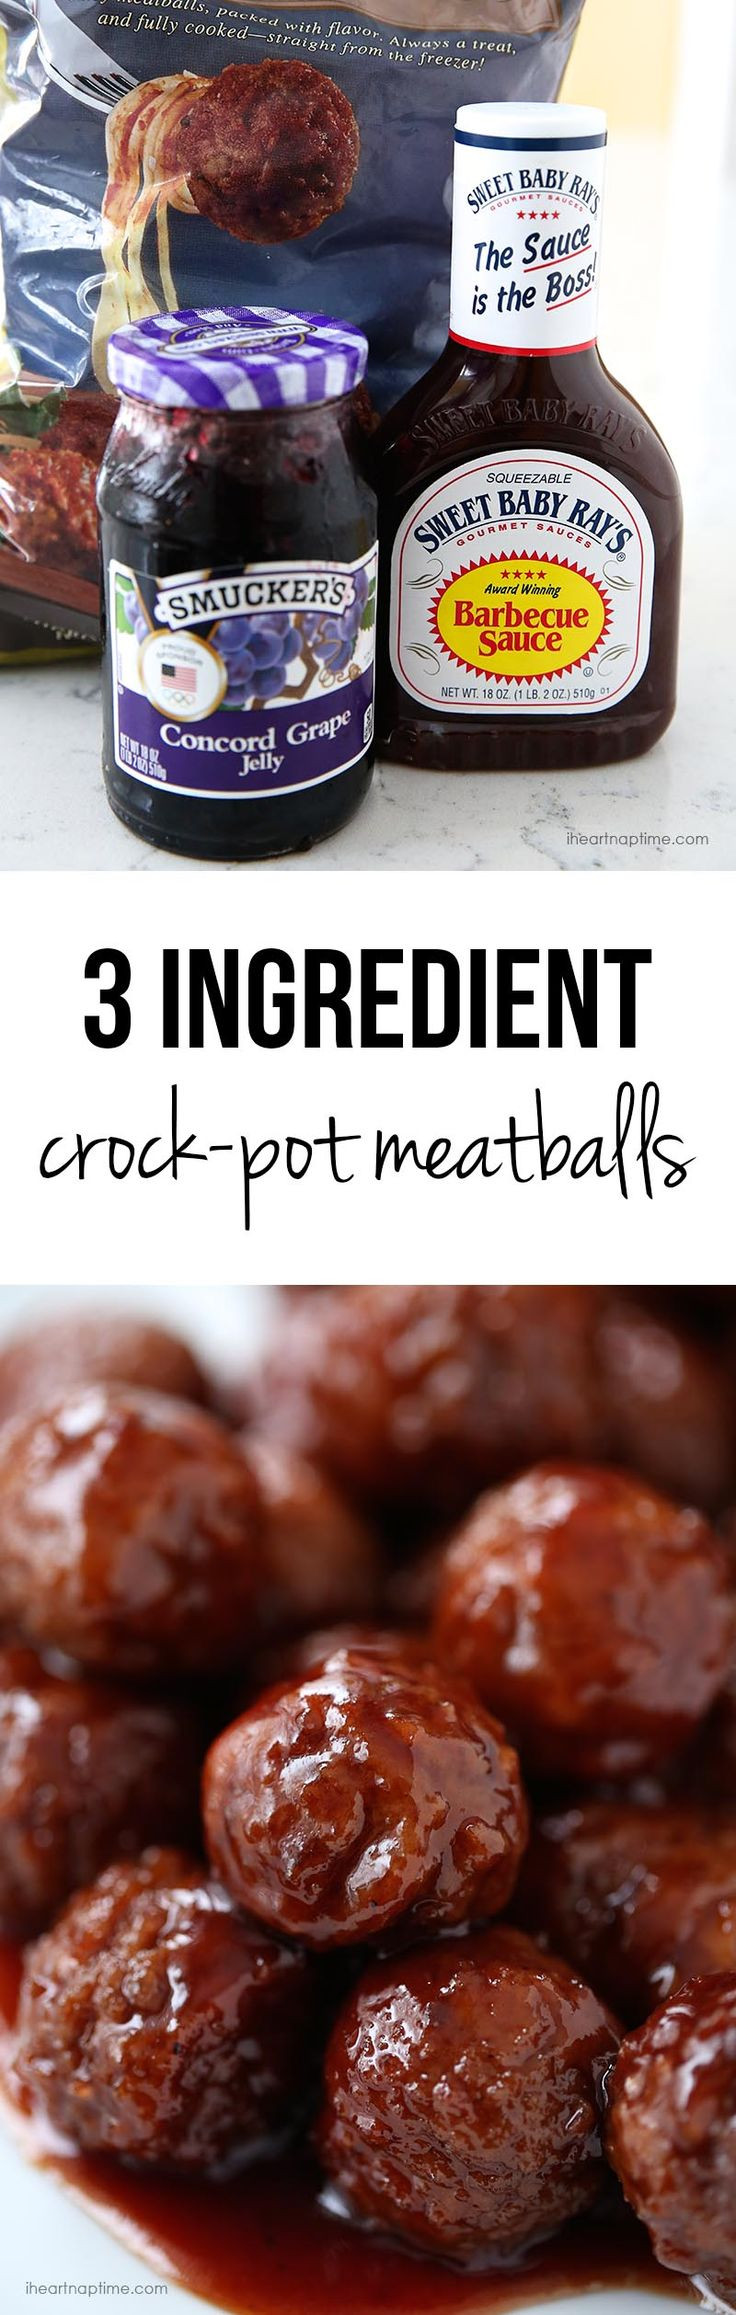 Meatballs With Grape Jelly And Bbq Sauce
 25 best ideas about Meatball Sauce on Pinterest